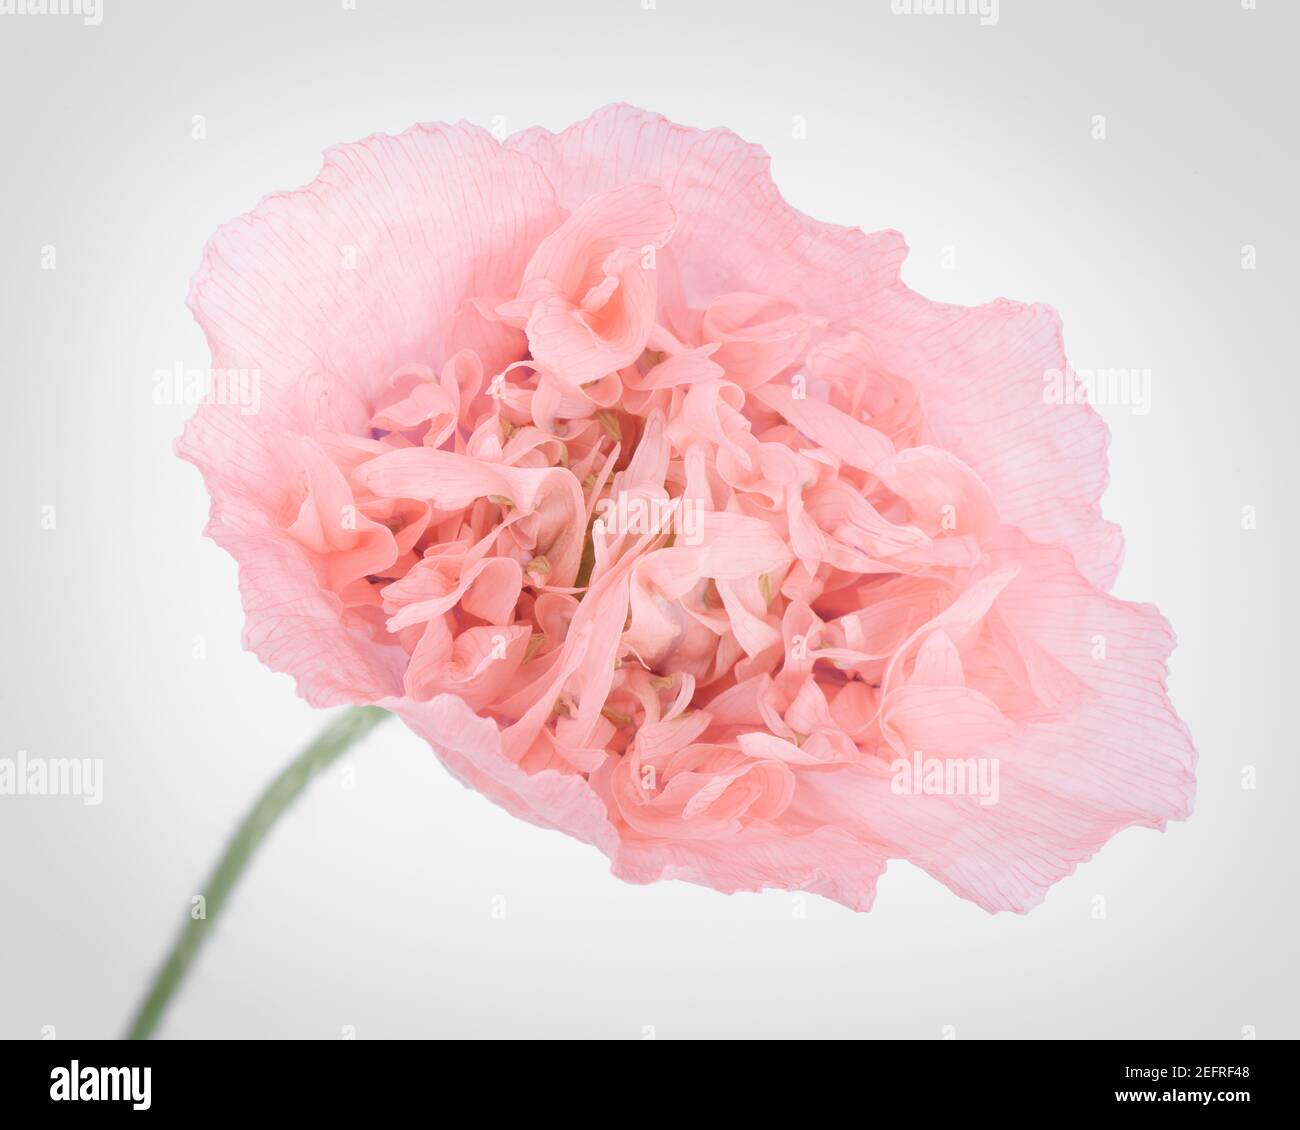 Pink Peony Poppy, artistic closeup of a flower with light pink petals, front view on white studio background. Papaver somniferum, Peoniflorum. Pink Pa Stock Photo